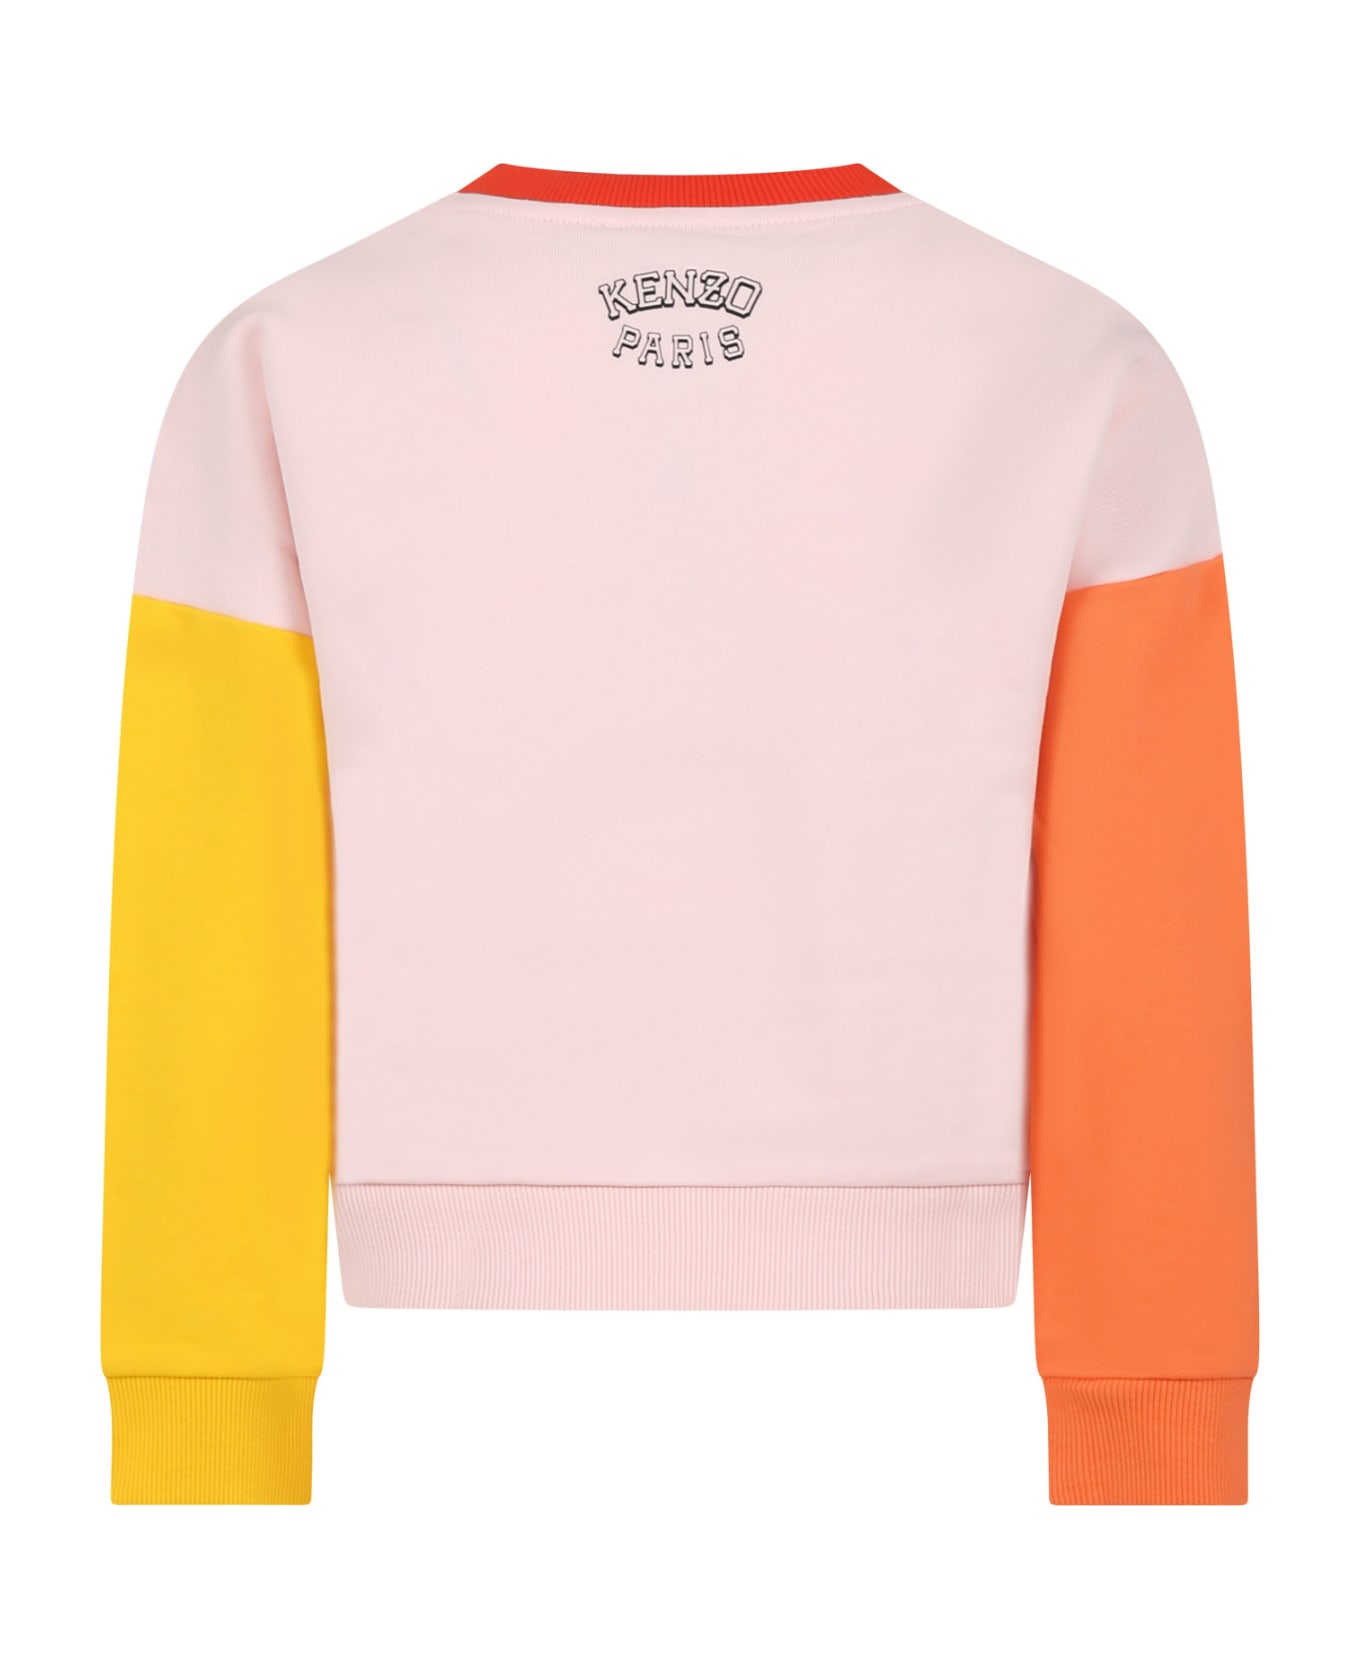 Kenzo Kids Multicolored Sweatshirt For Girl With Iconic Tiger And Logo - Multicolor